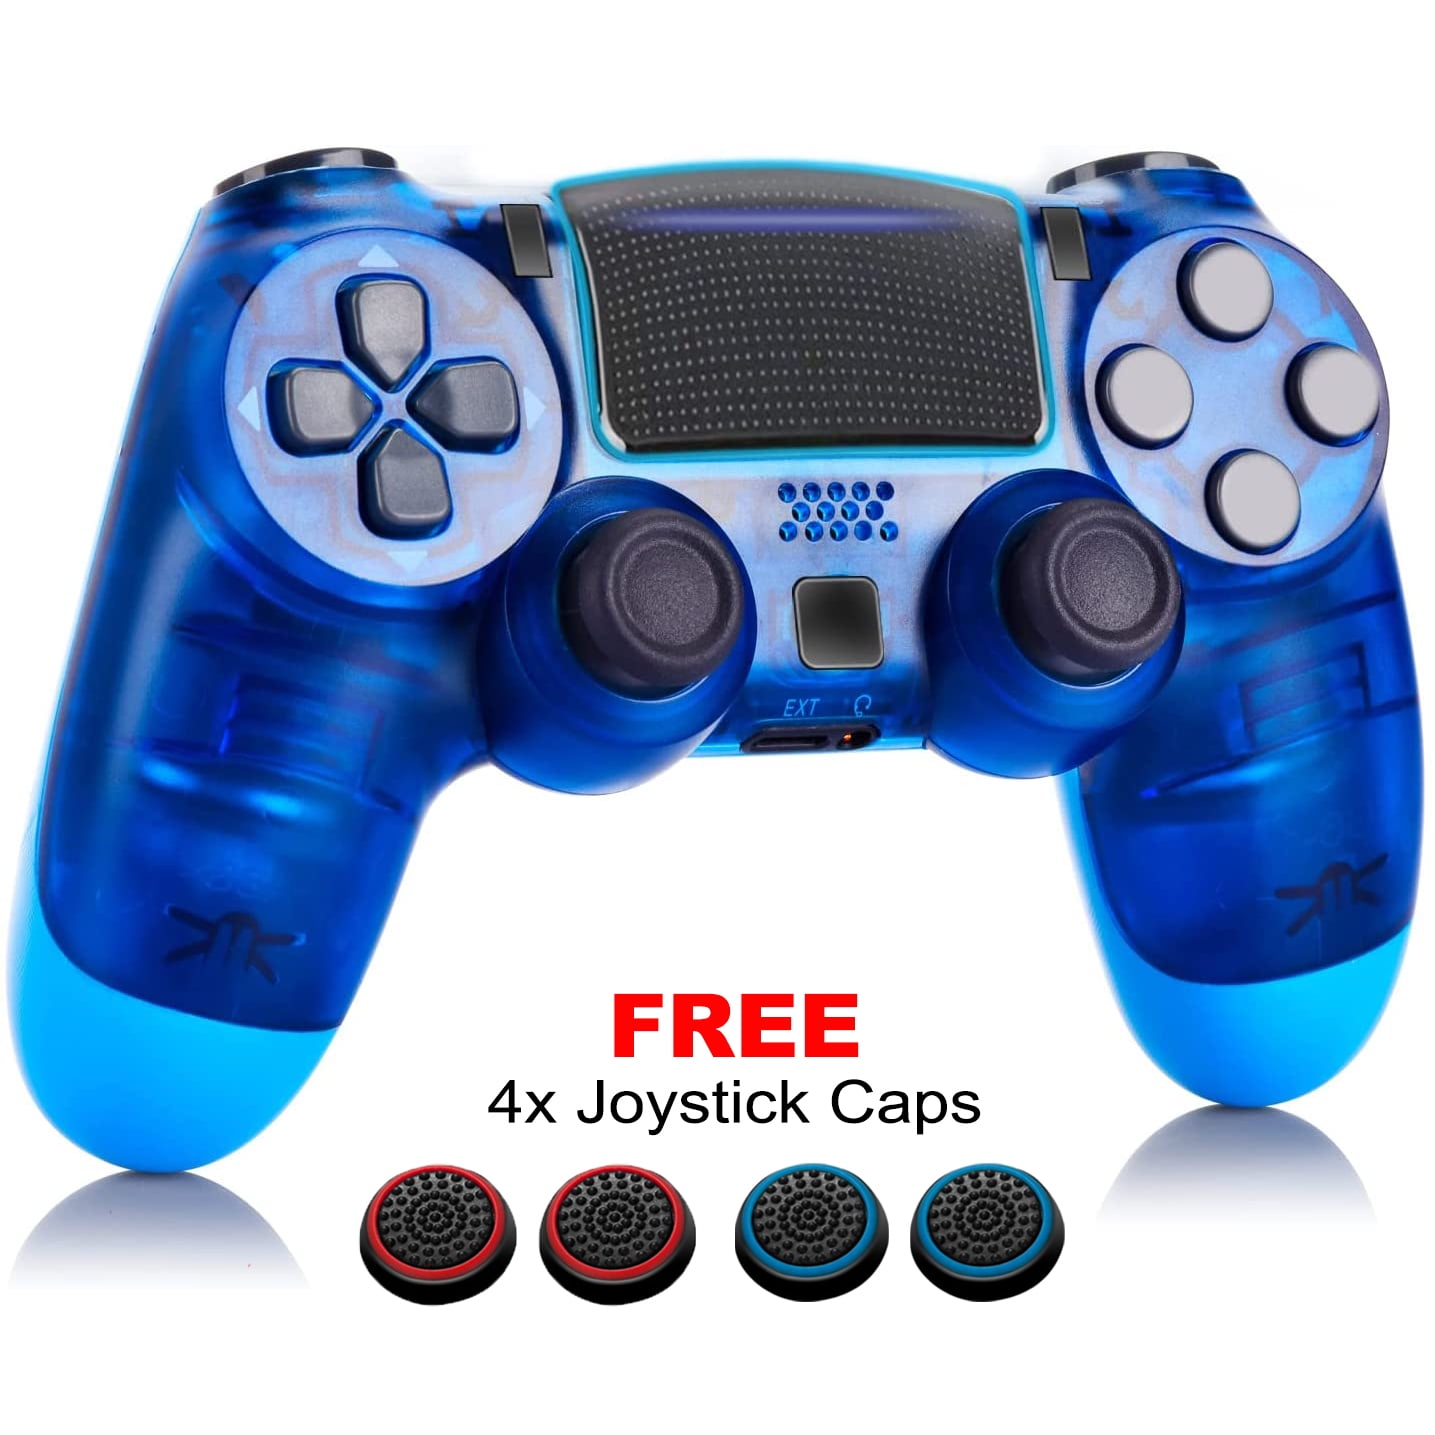 Wireless Controller for PS4, Wireless PS4 Gaming Controller USB Gamepad  Joypad Controller with Dual-Vibration for PS4/ Slim/Pro/PC(Win 7/8/10) 